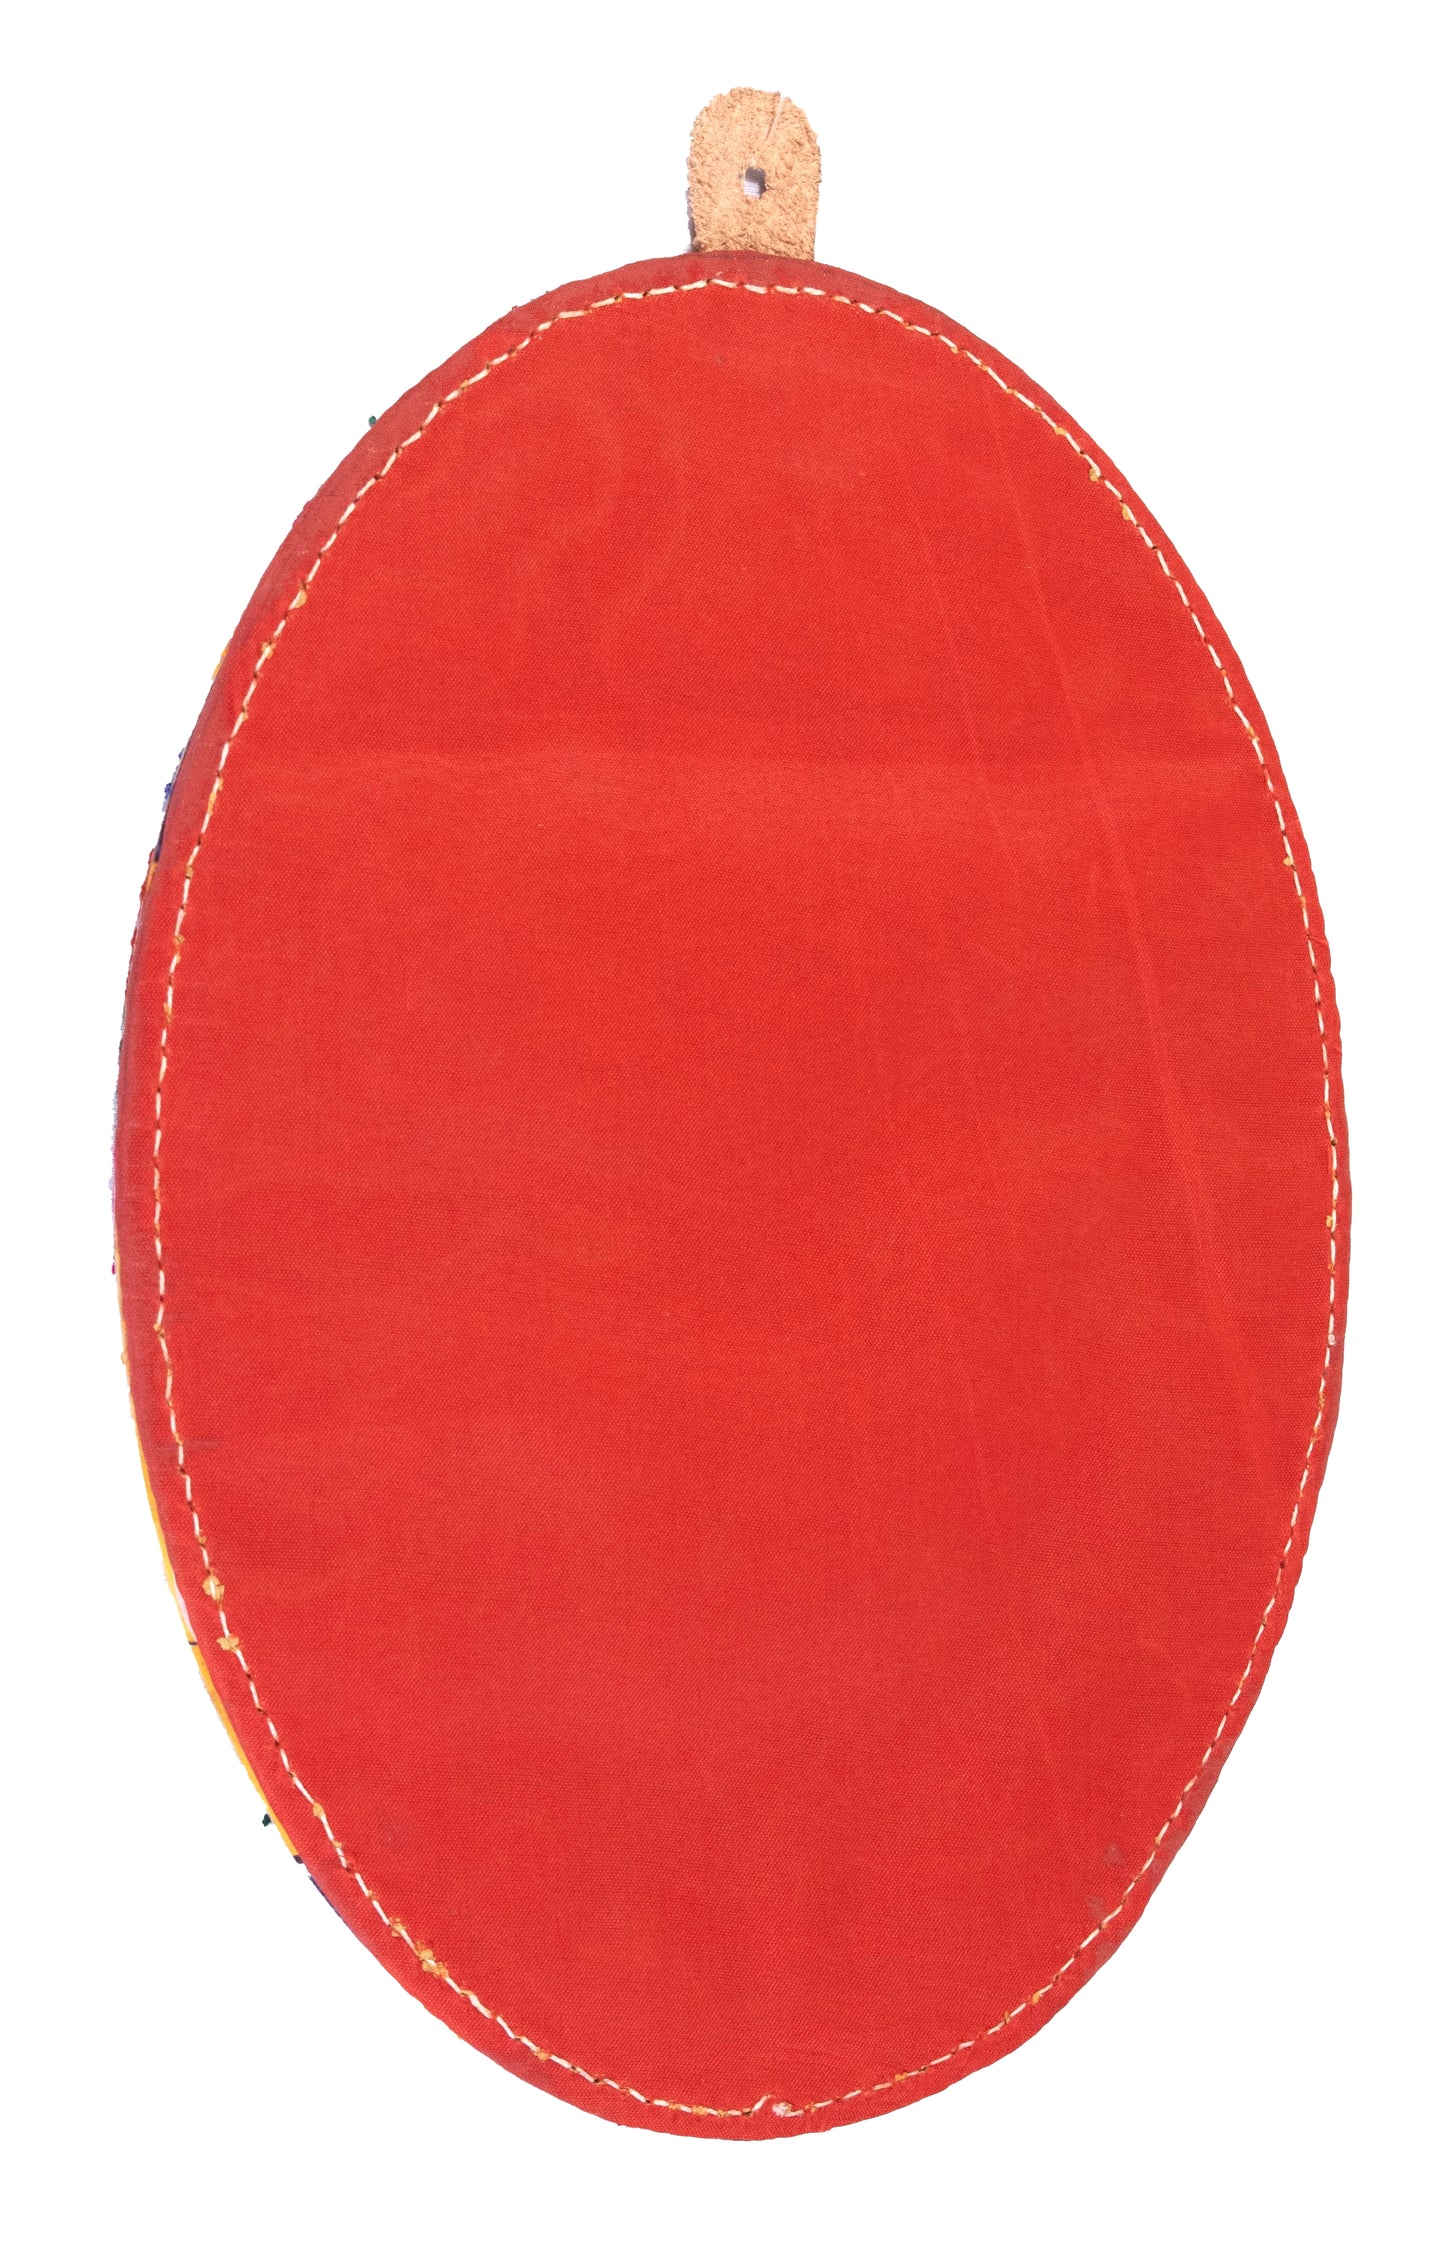 Leather Craft Punch Work Rexine Mirror  Small  - Oval  -  SKU: 0017